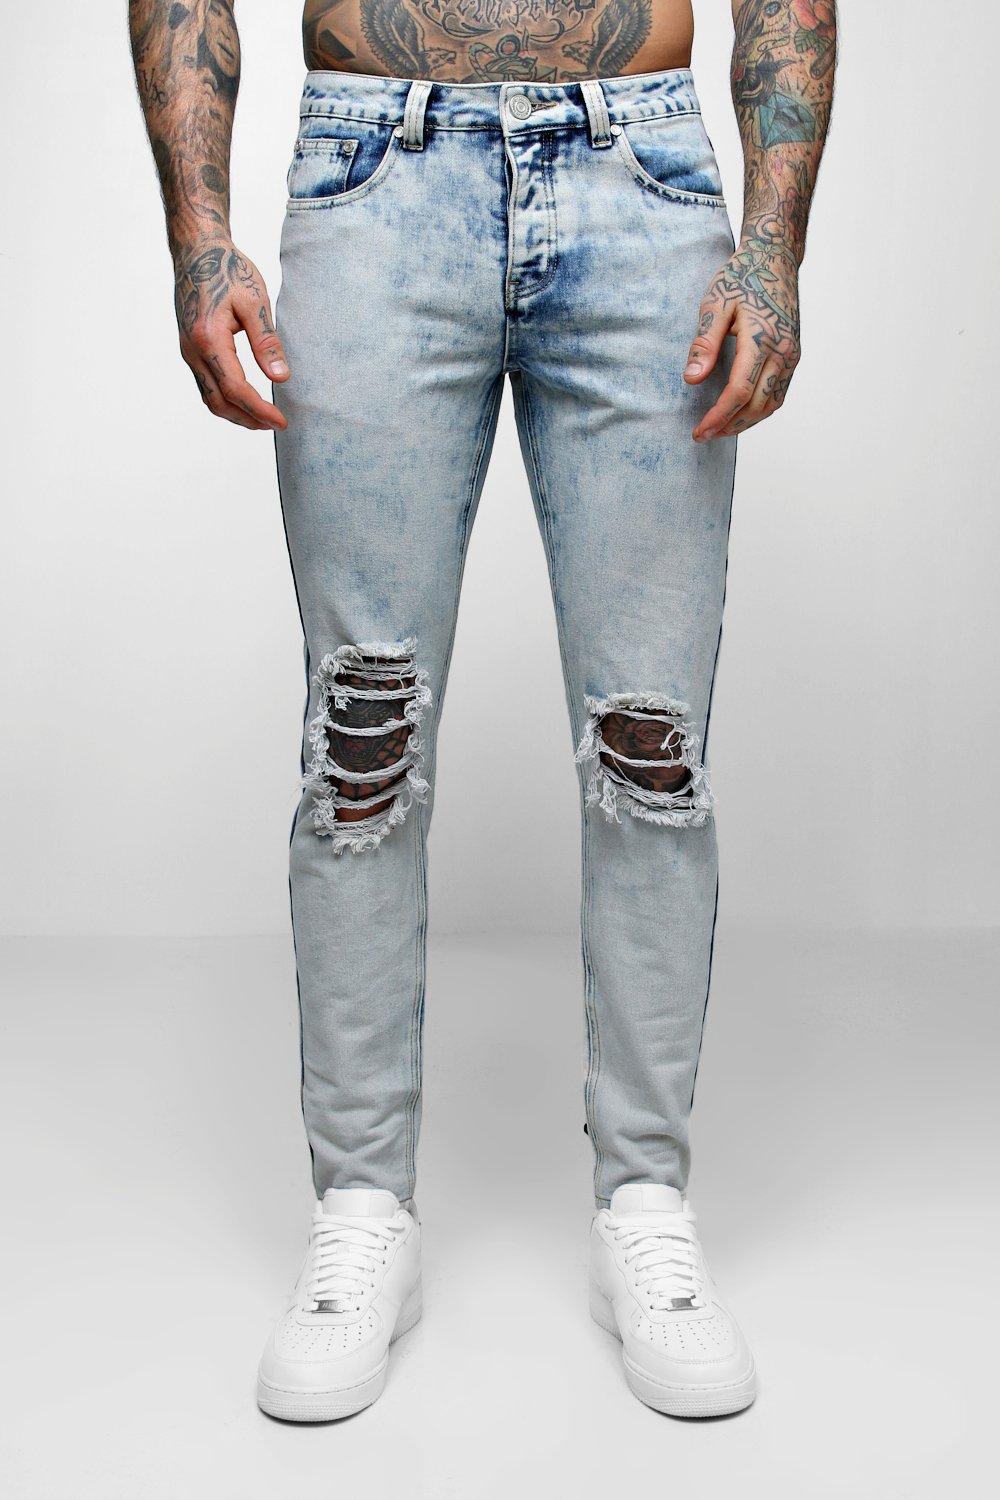 ripped acid wash jeans mens